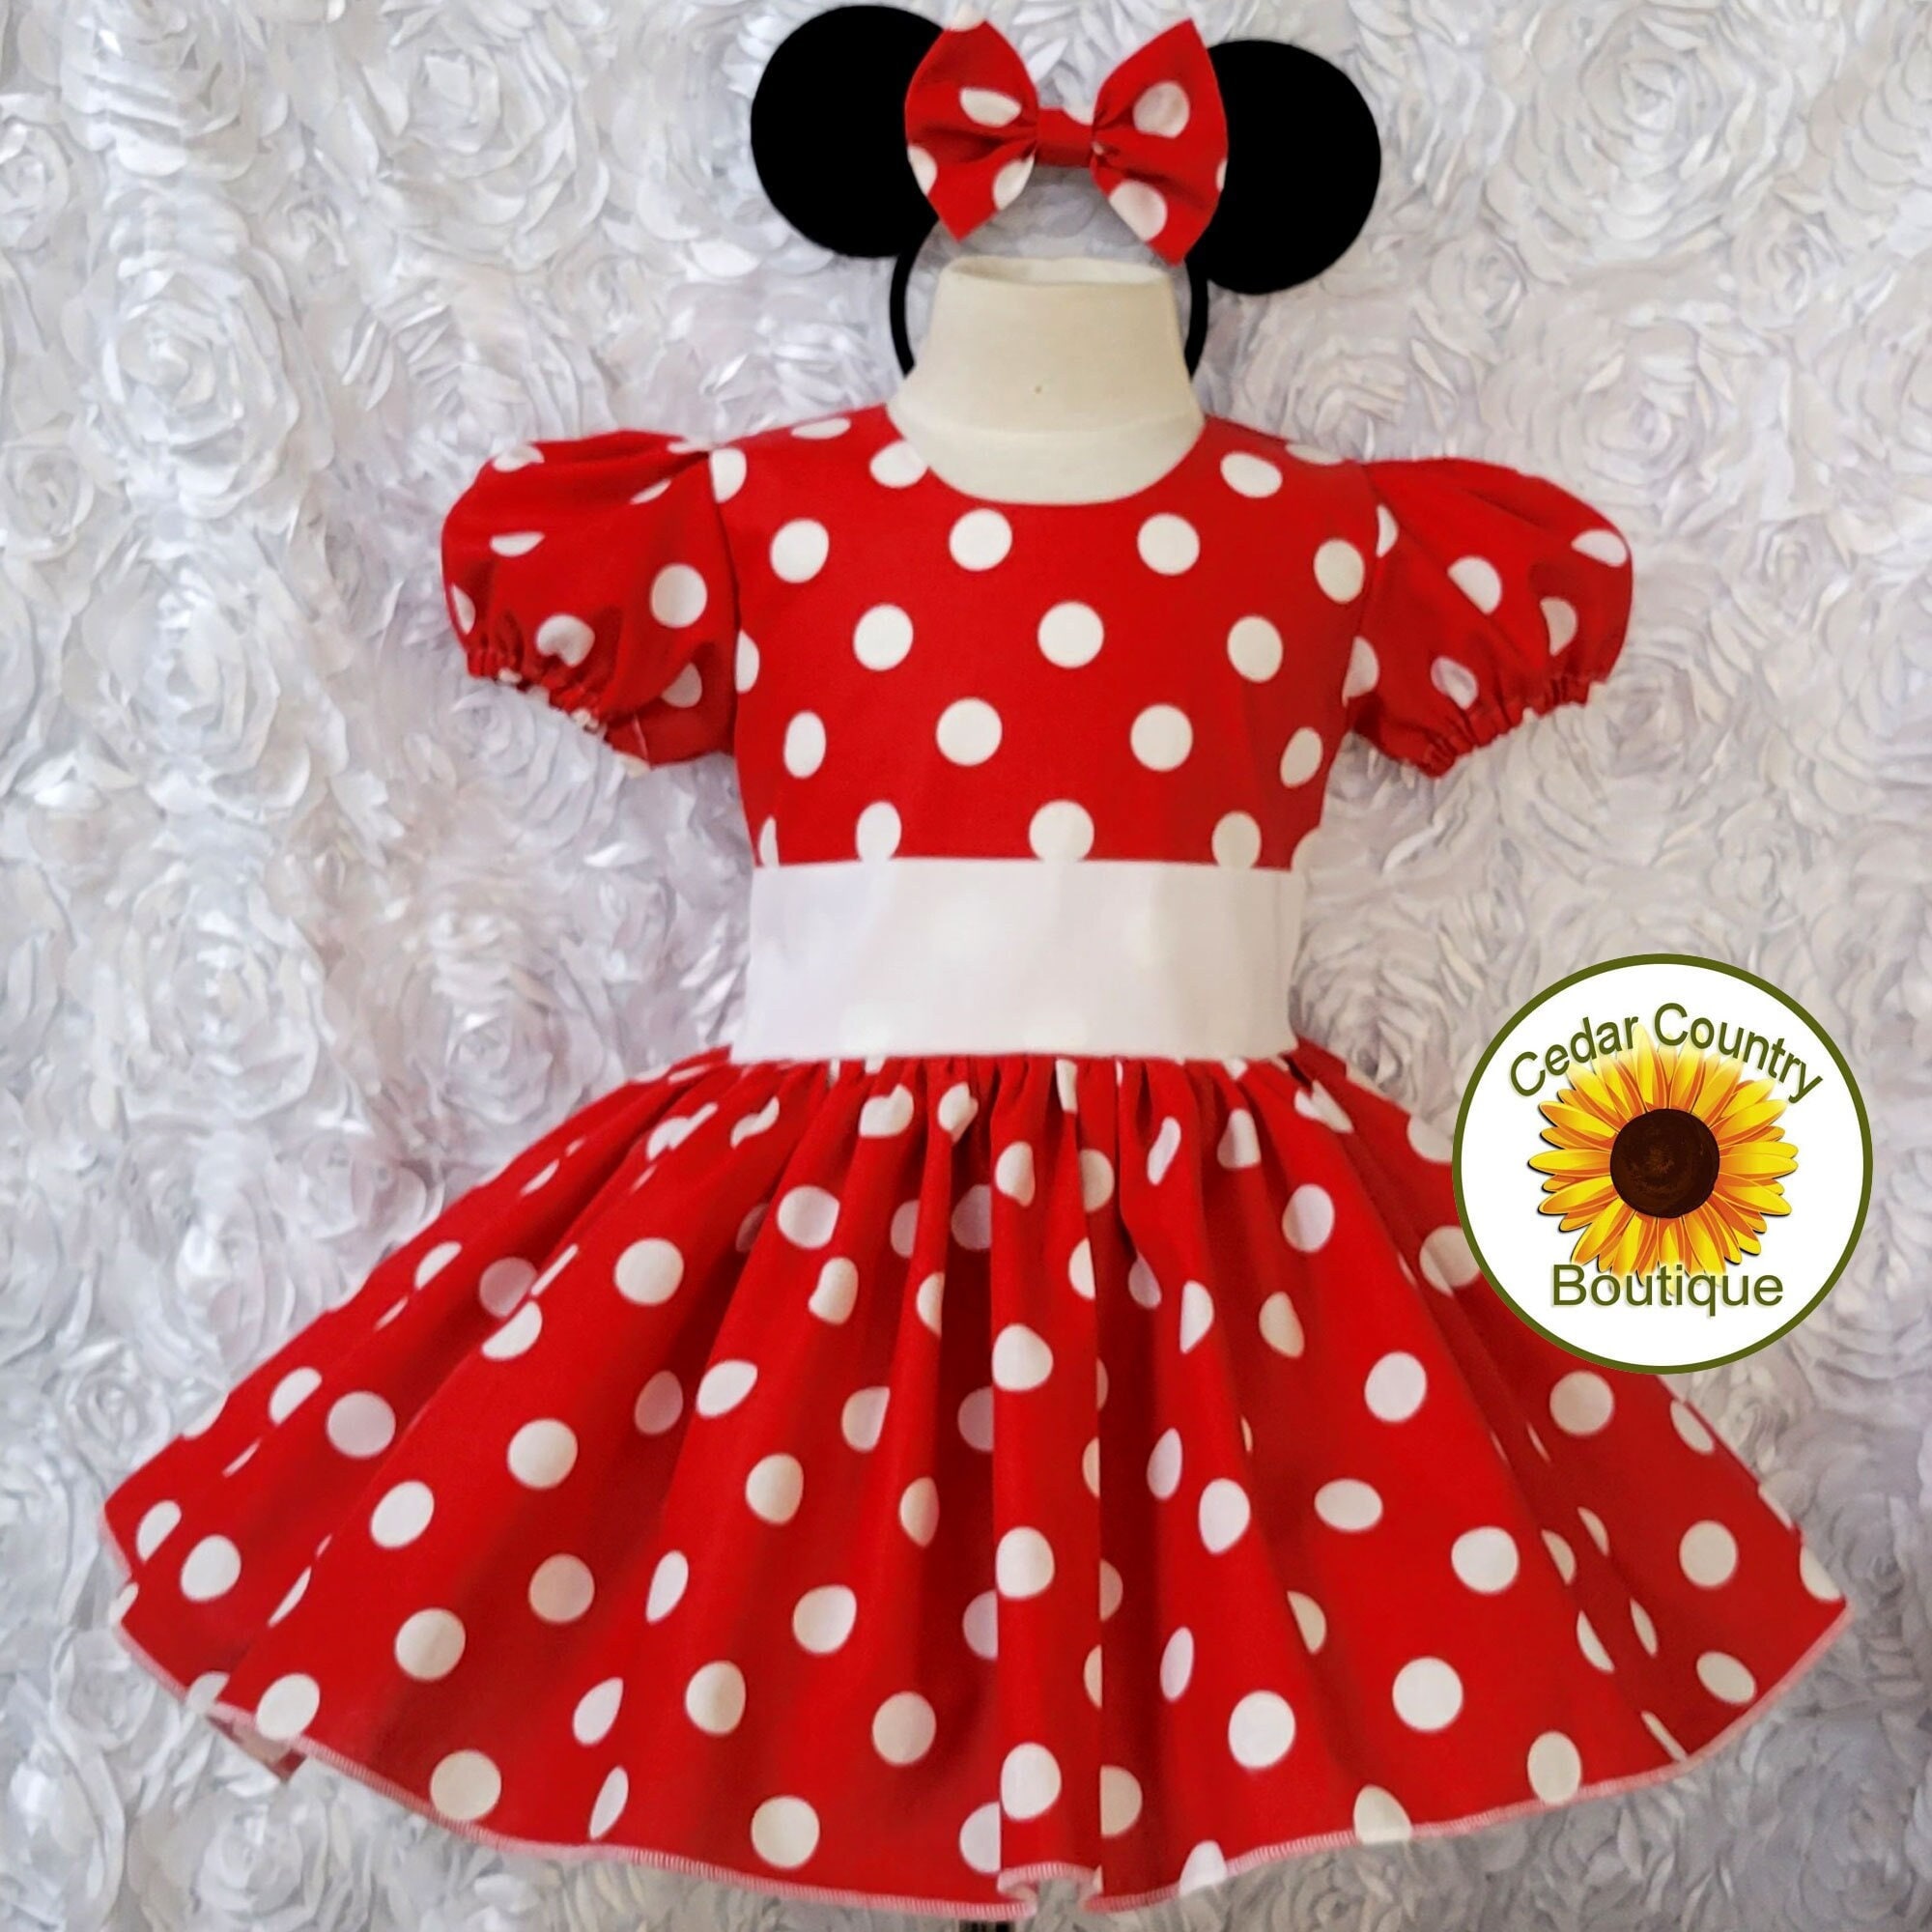 Disney Baby Minnie Mouse Outfit Costume Girls 6-12 Months Ears Dress NEW ah